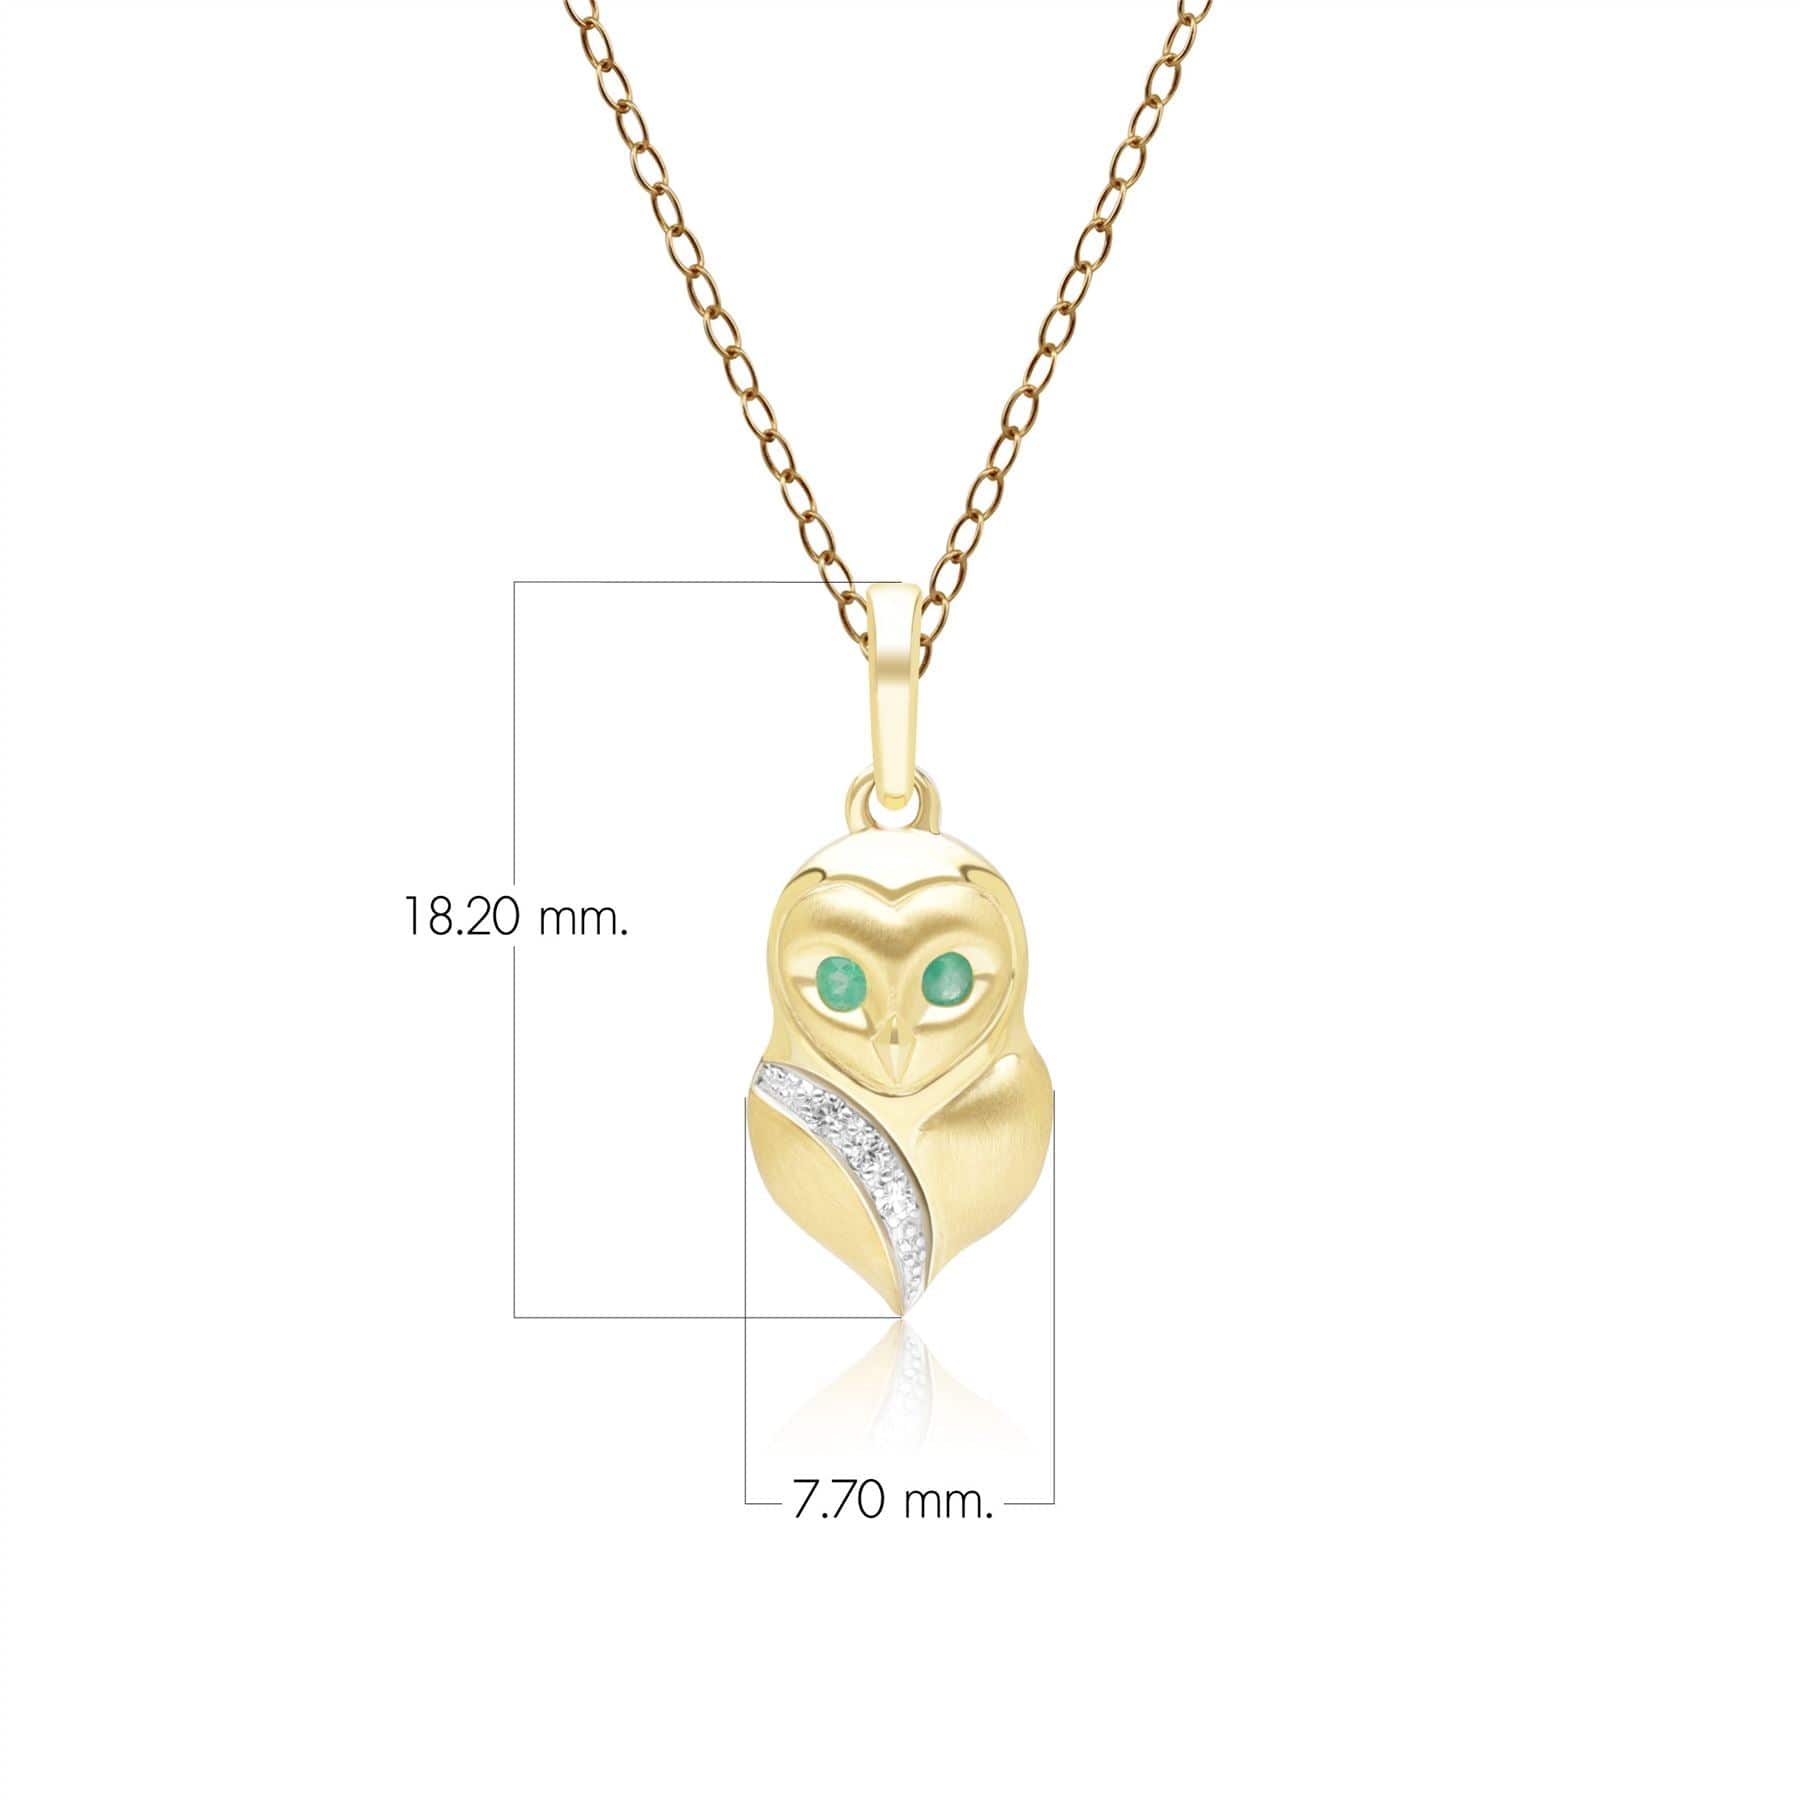 135P2128029 Gardenia Emerald and White Sapphire Owl Pendant Necklace in 9ct Yellow Gold Dimensions